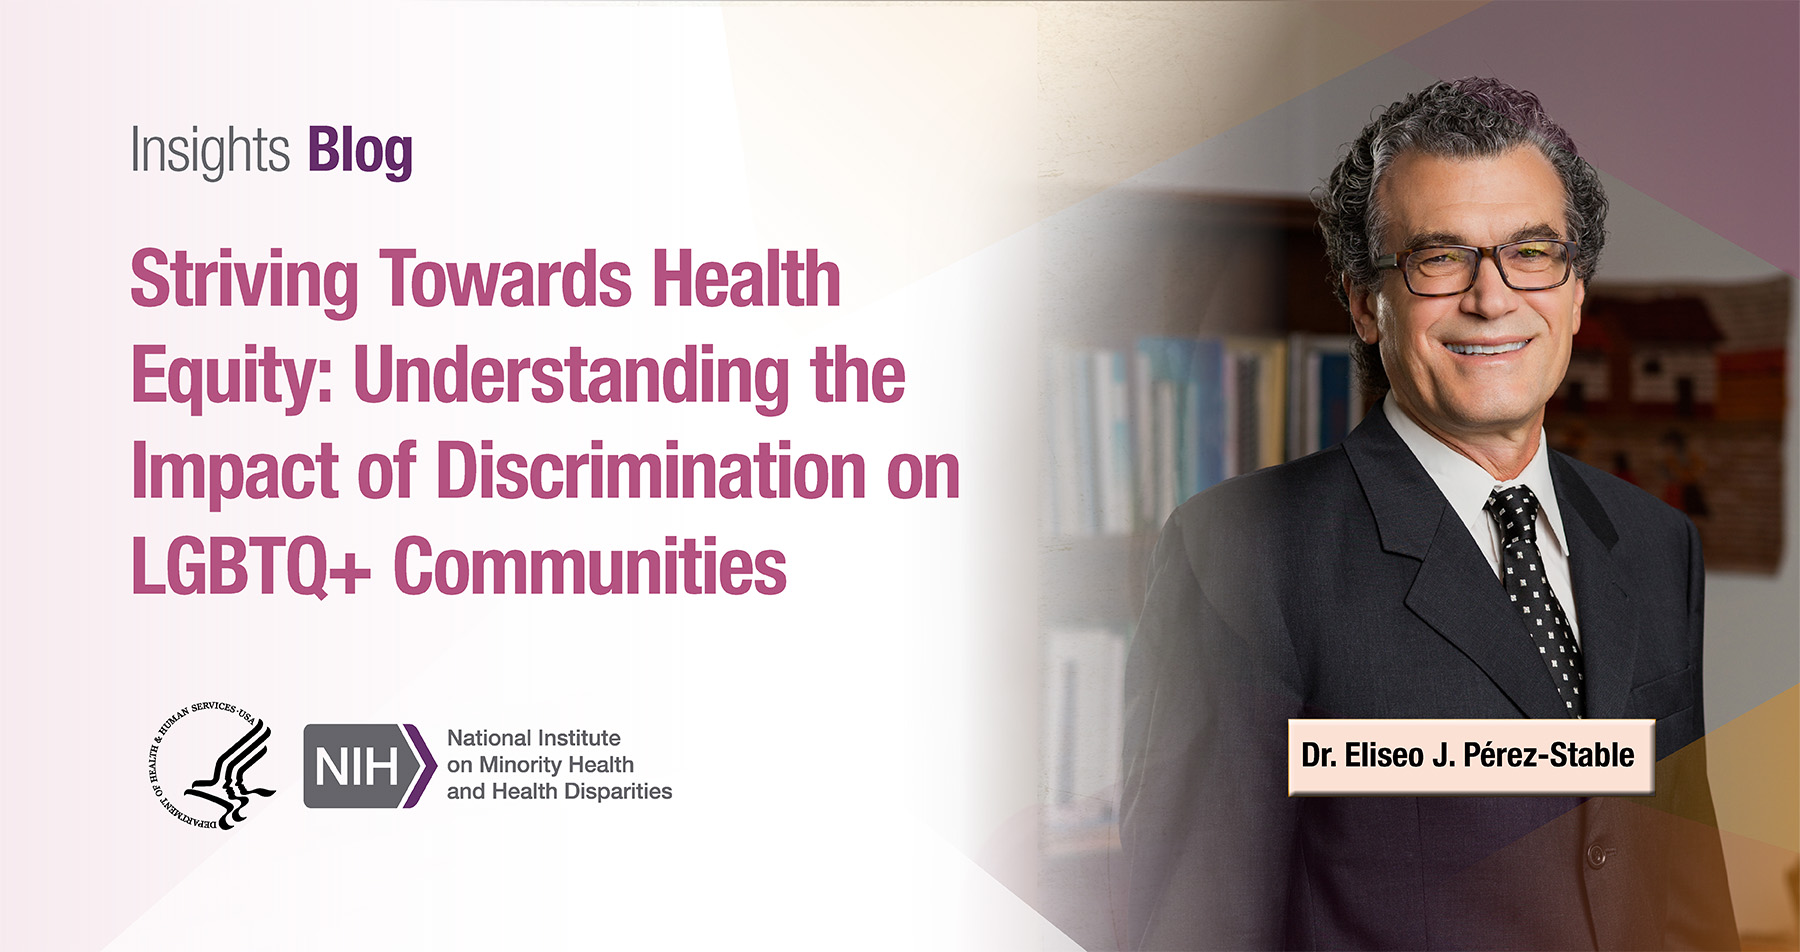 Insights Blog: Striving Toward Health Equity: Understanding the Impact of Discrimination on LGBTQ+ Communities